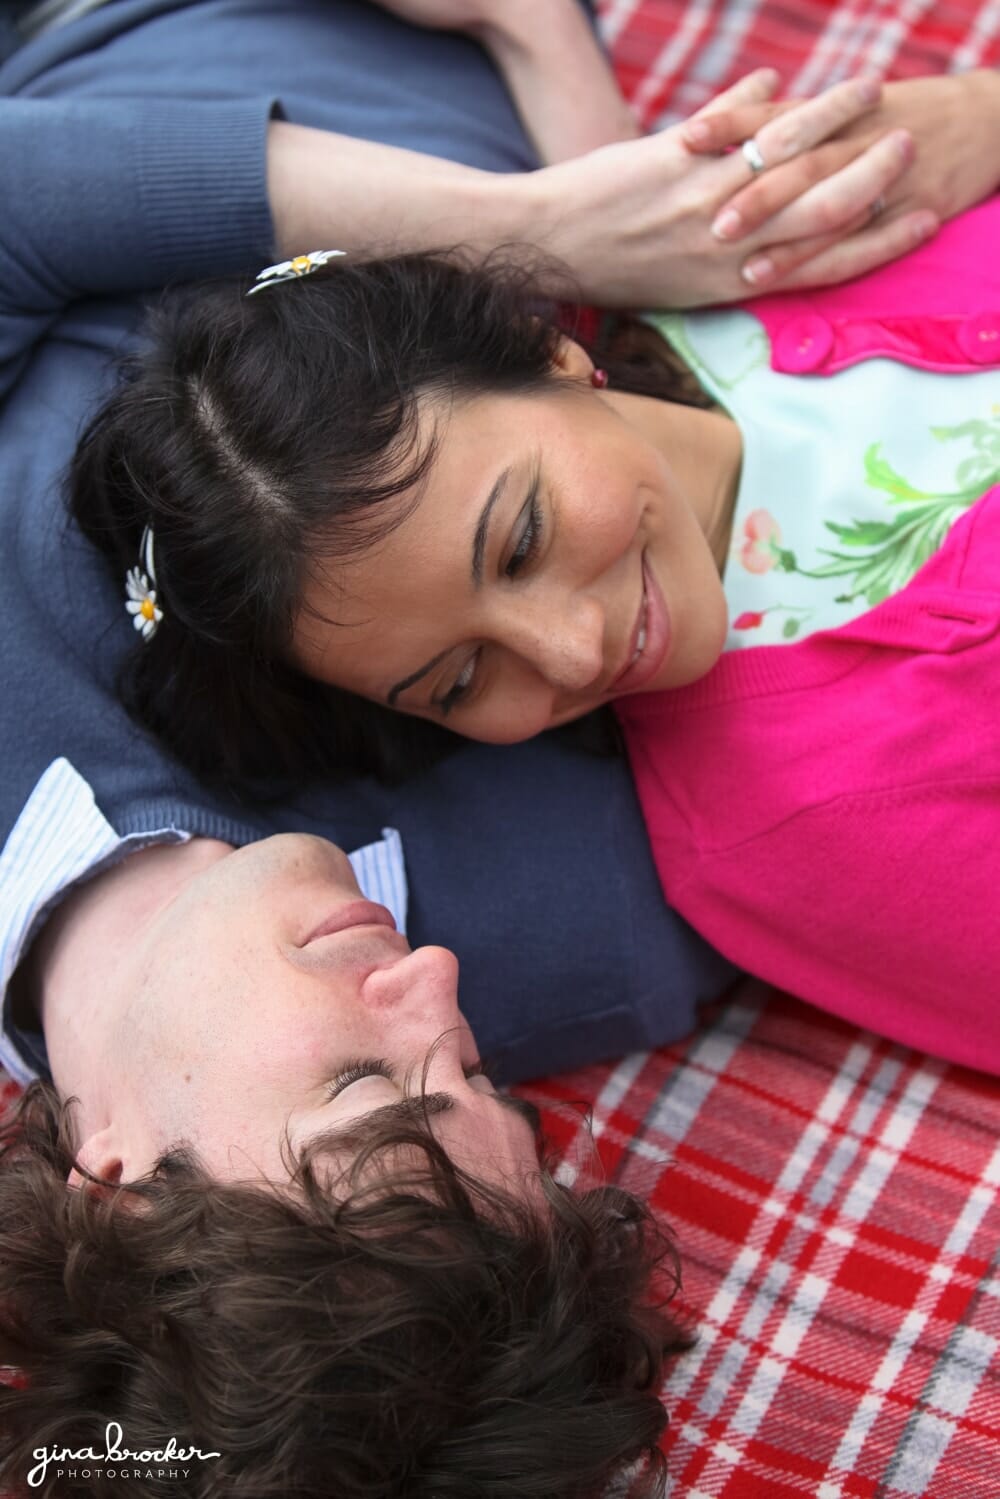 A couple lay together on a blanket during their picnic inspired engagement session in Boston, Massachusetts